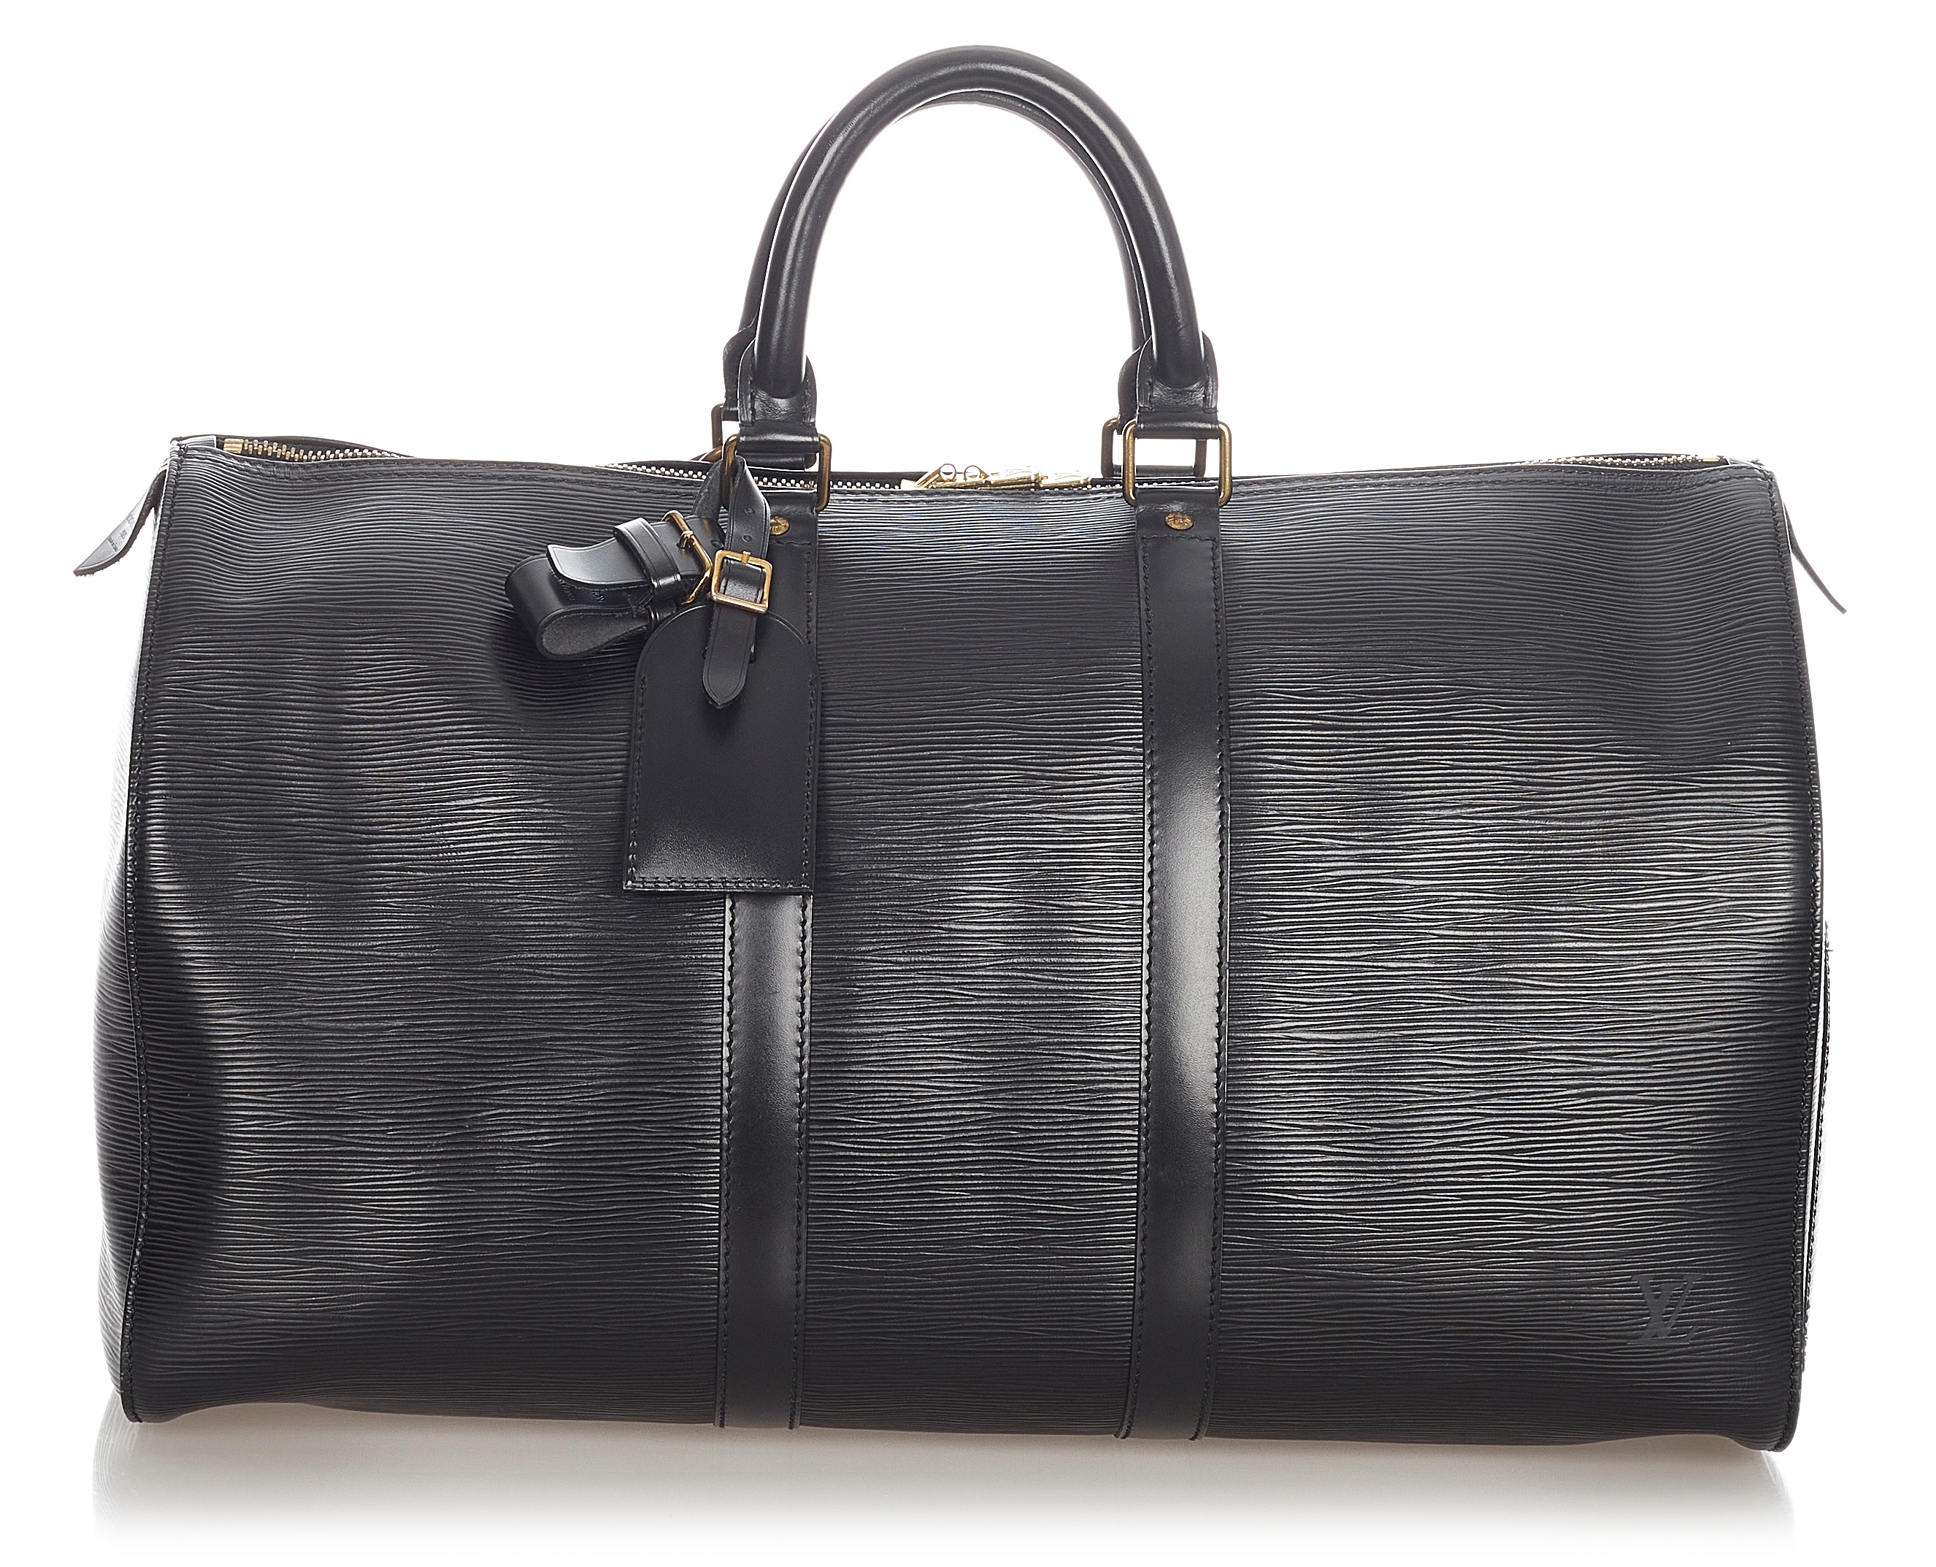 Keepall patent leather travel bag